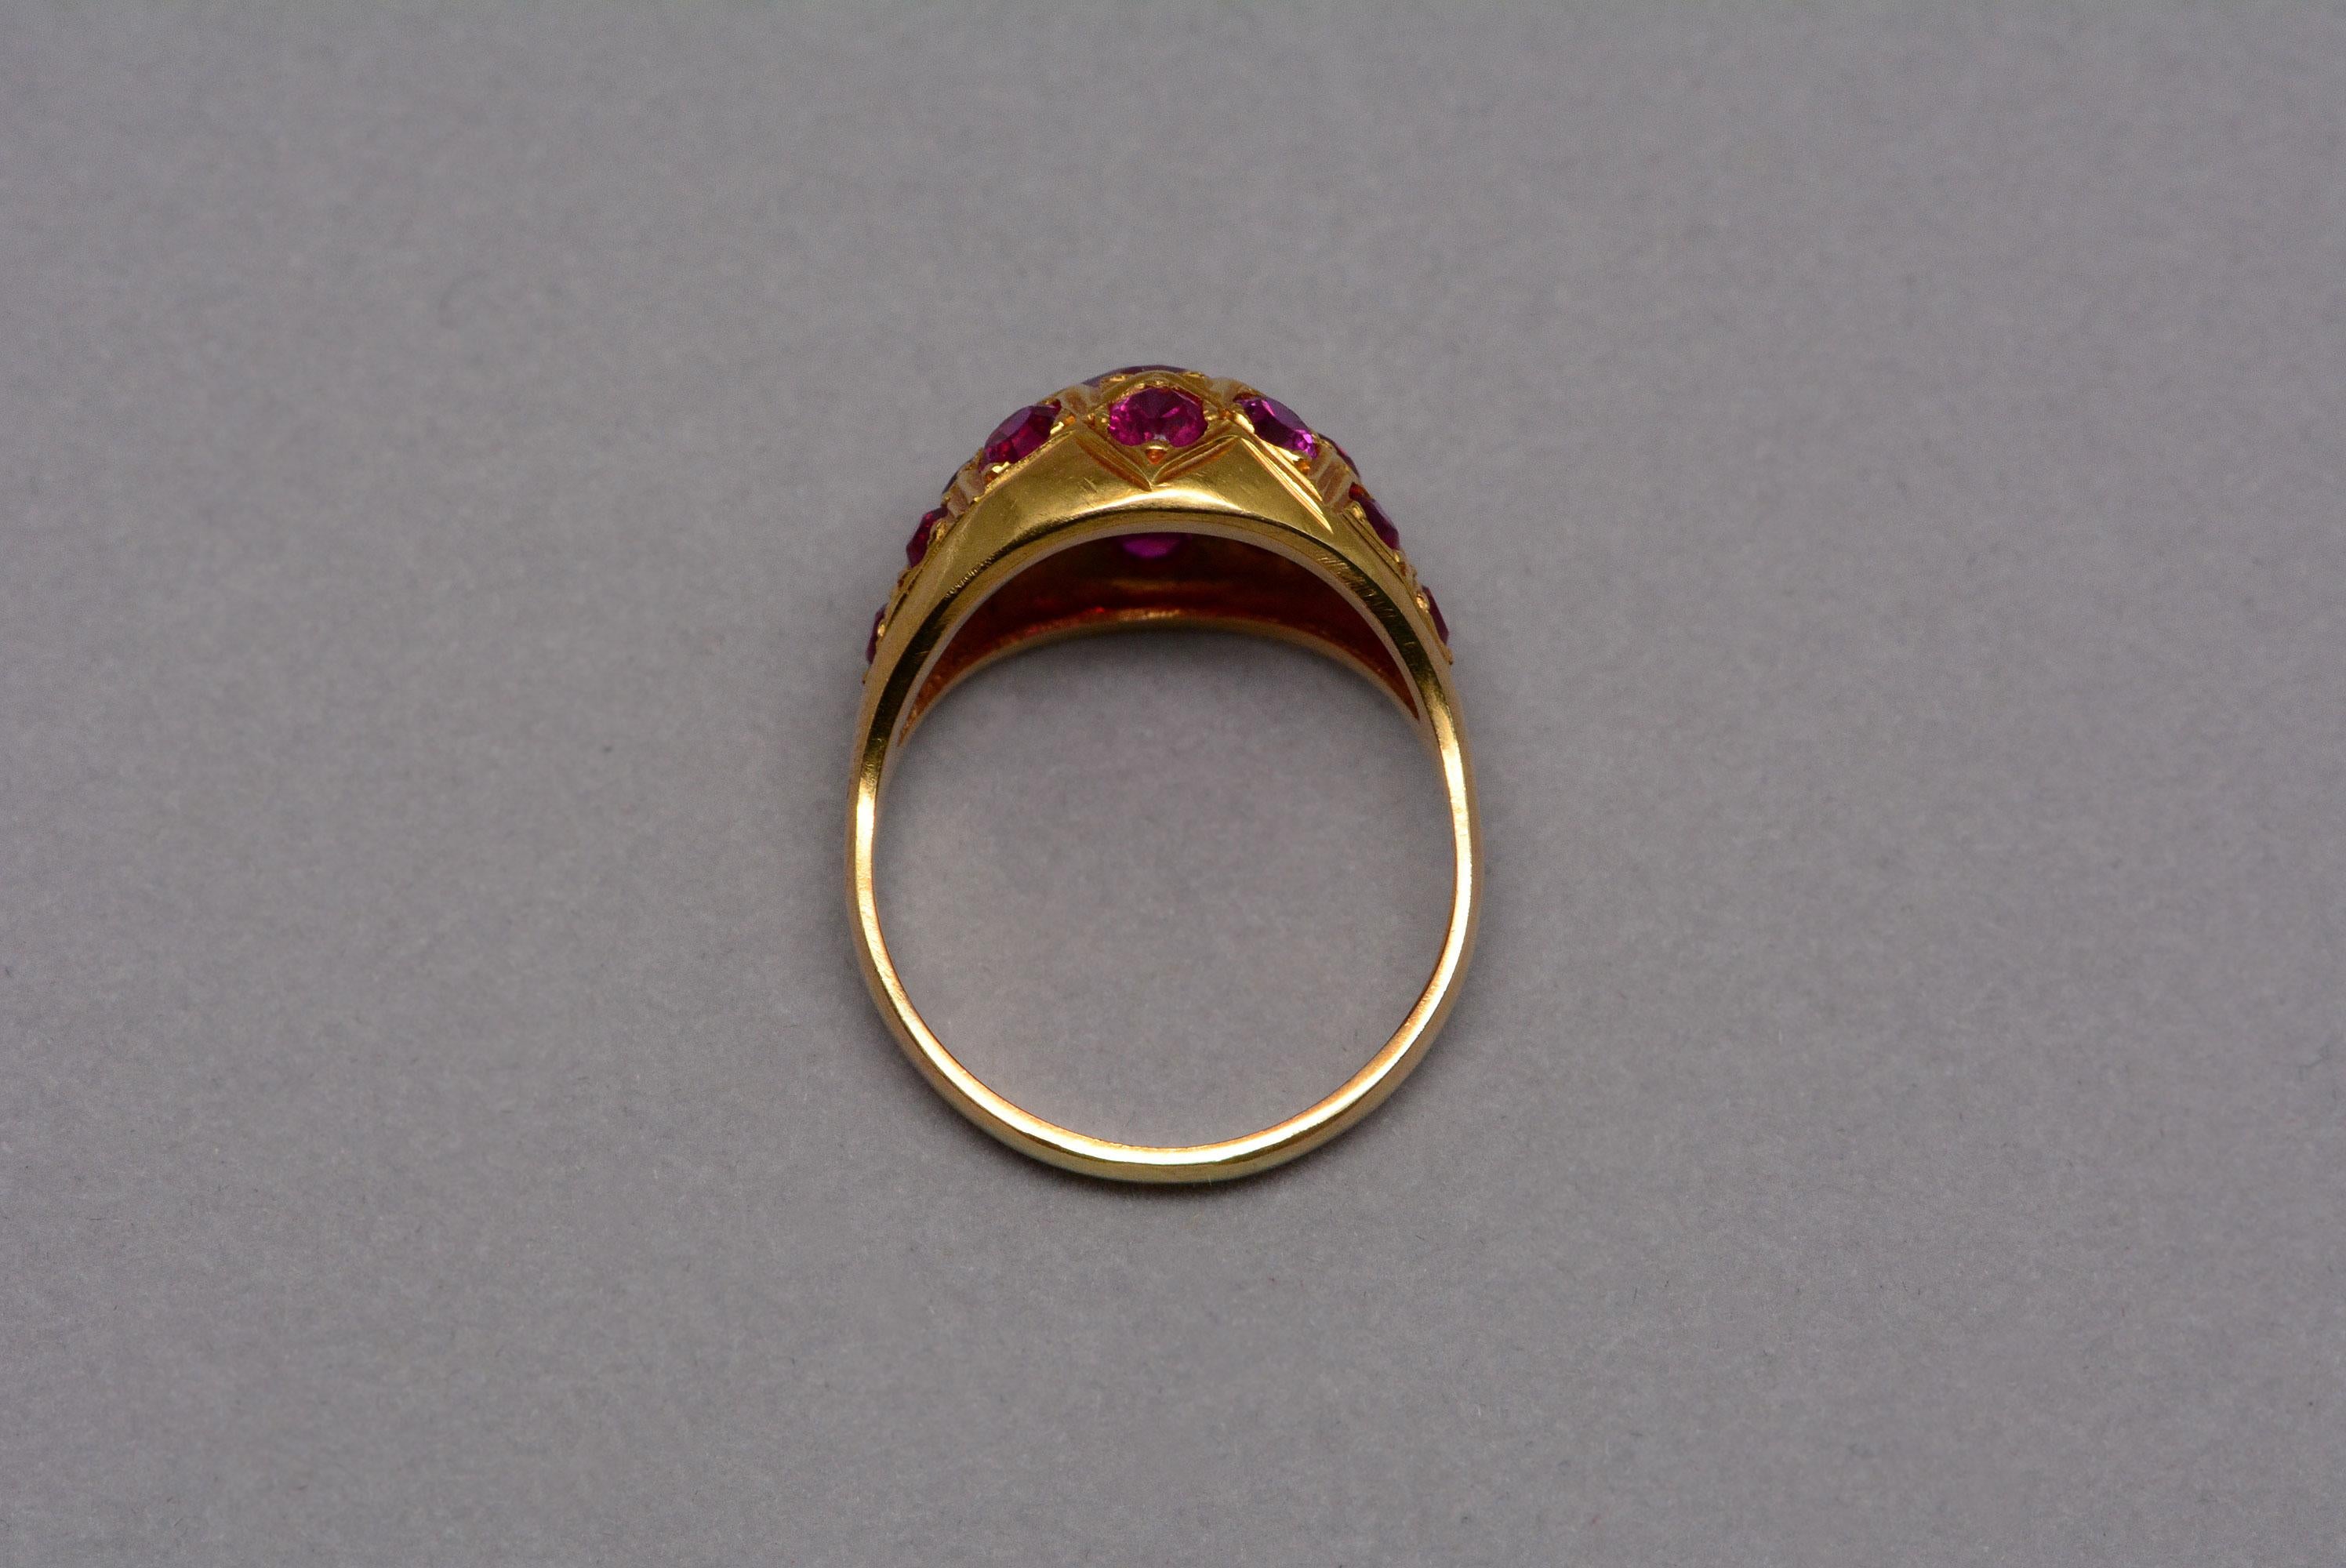 Synthetic Ruby 21 Karat Gold Bombé Ring In Good Condition For Sale In Aurora, Ontario